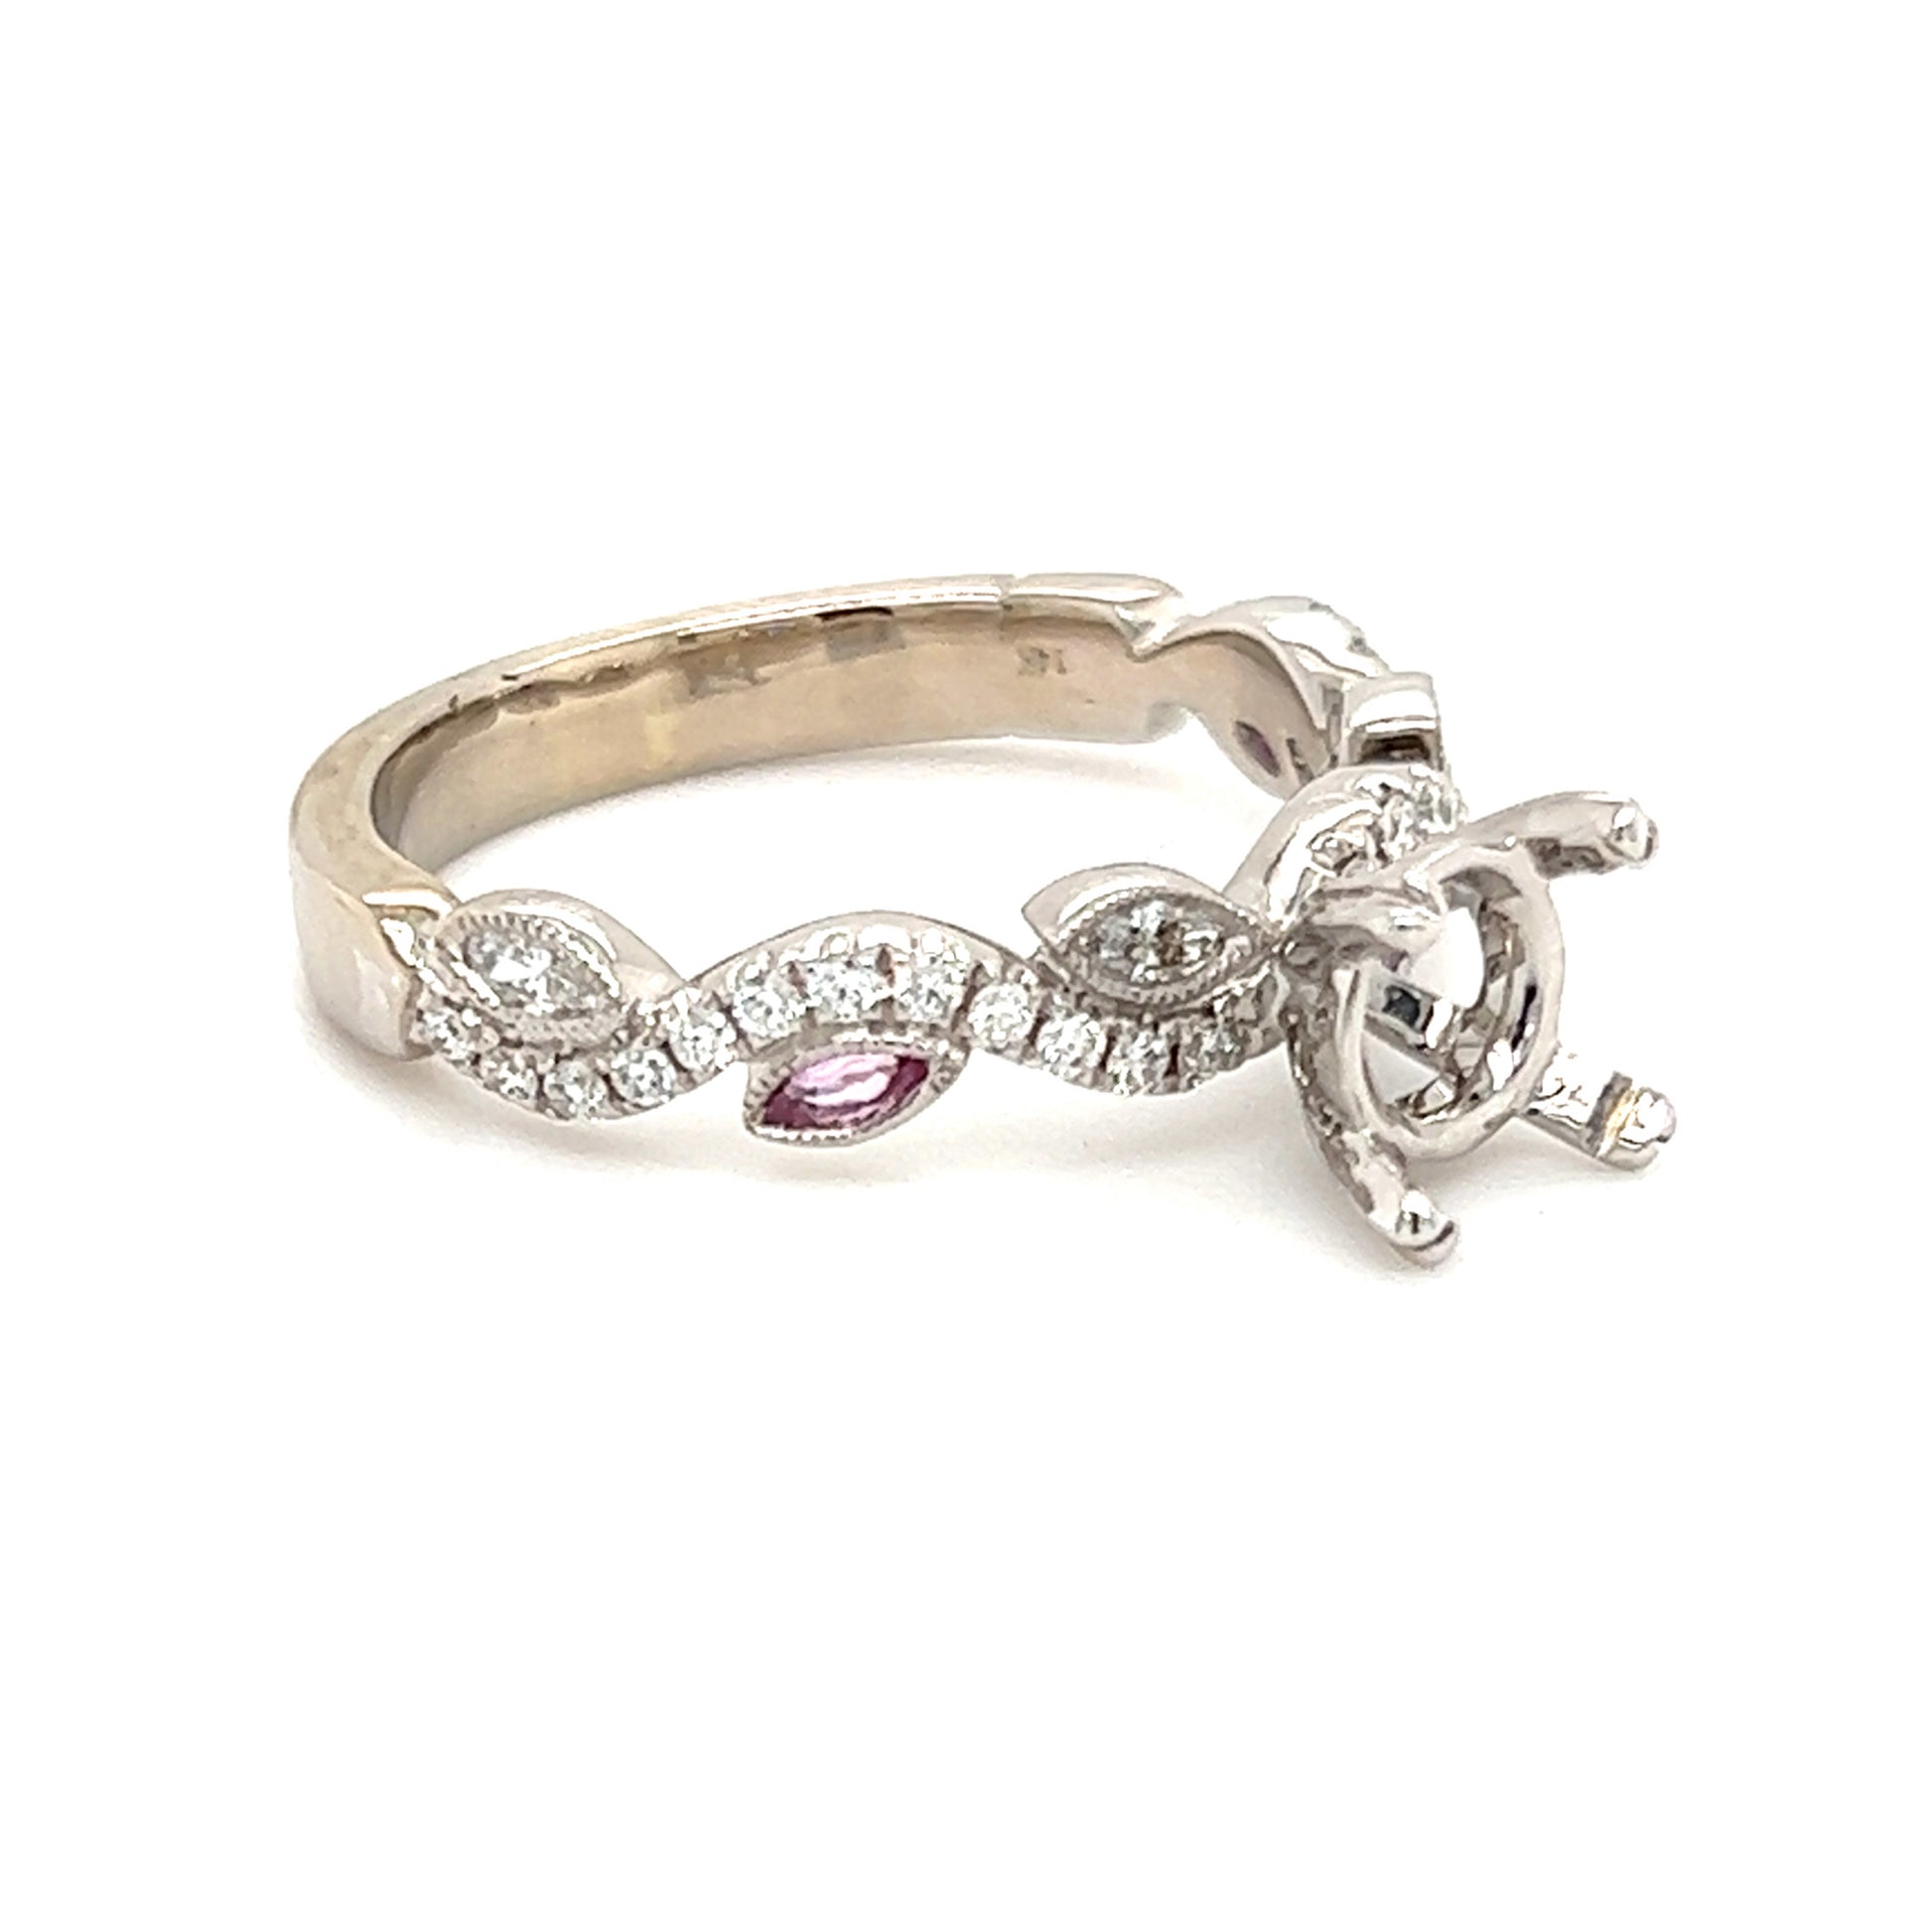 Vine Motif Ring Setting with Pink Sapphires and Diamond Accents in 14K White Gold Left Side View